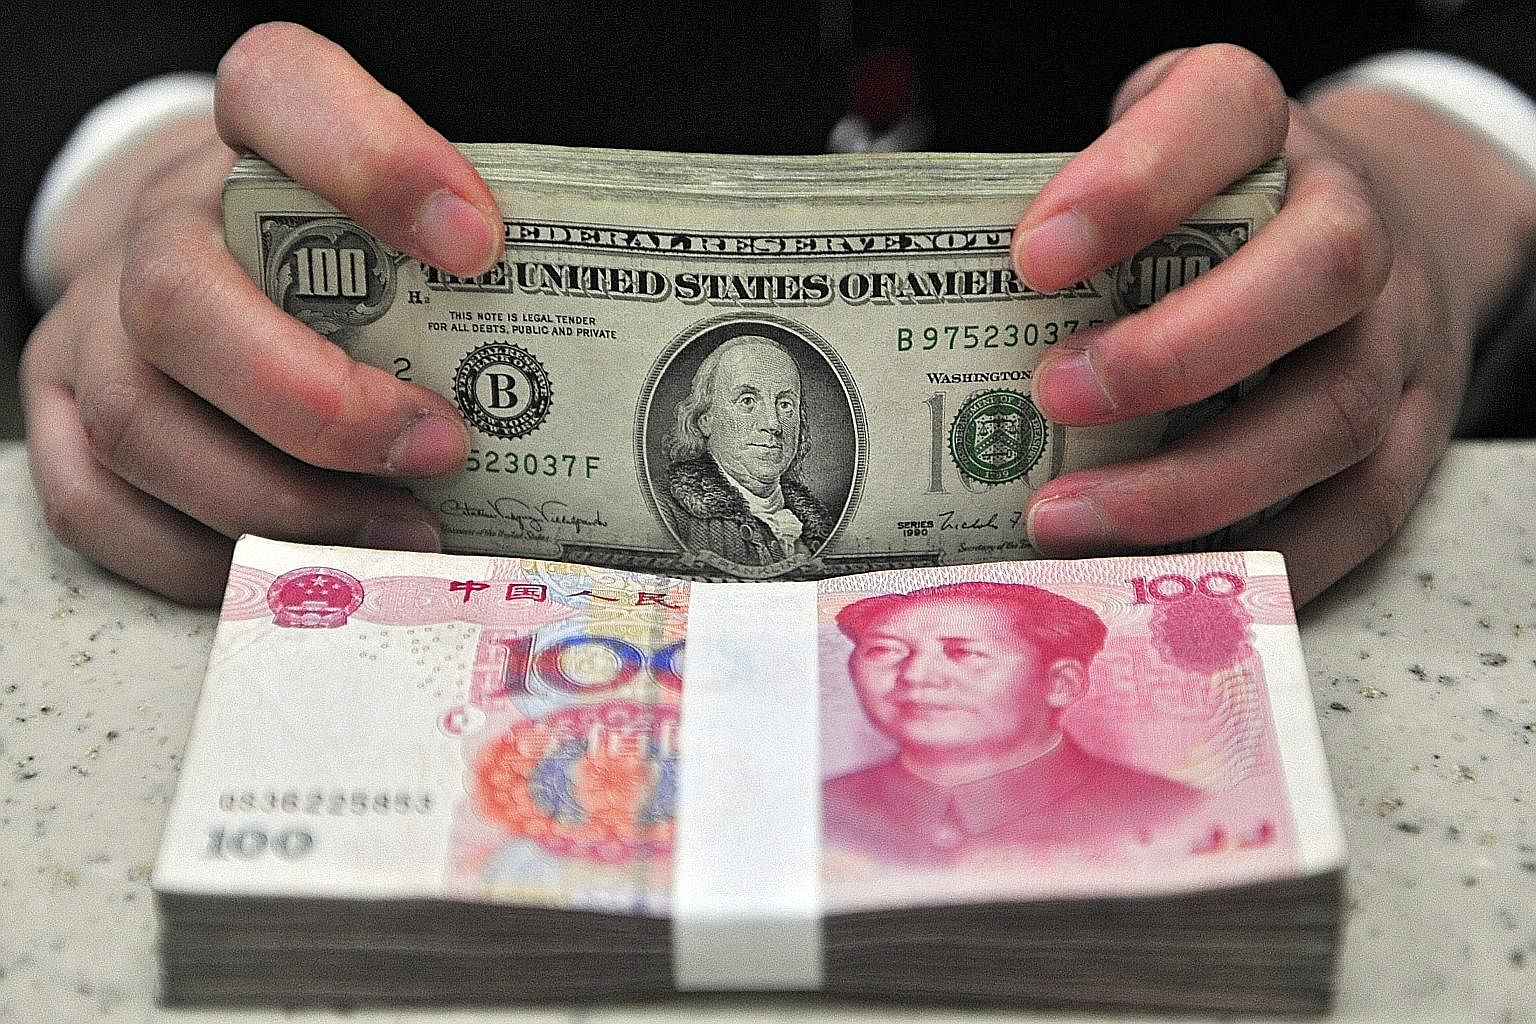 China's yuan has just joined the US dollar, British pound, EU euro and Japanese yen as a global reserve currency. The history of such currencies is correlated with political stability. After all, would you rely on a currency to retain its value if yo